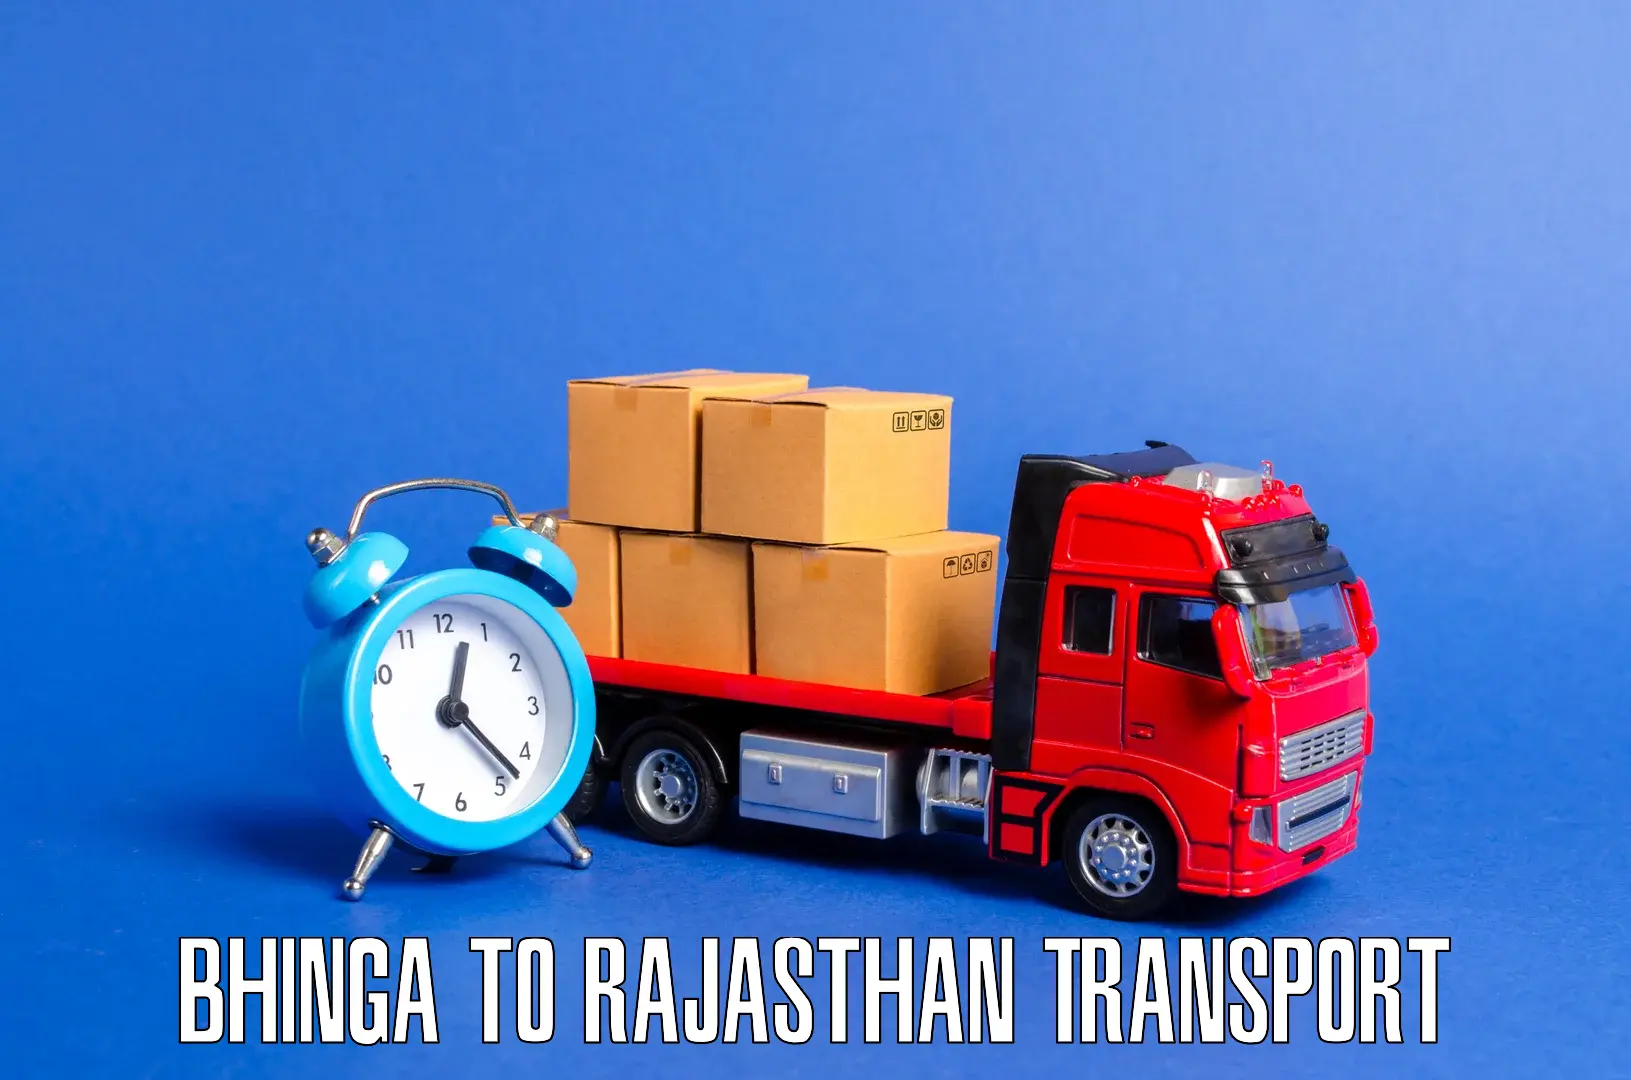 Commercial transport service Bhinga to Rajasthan